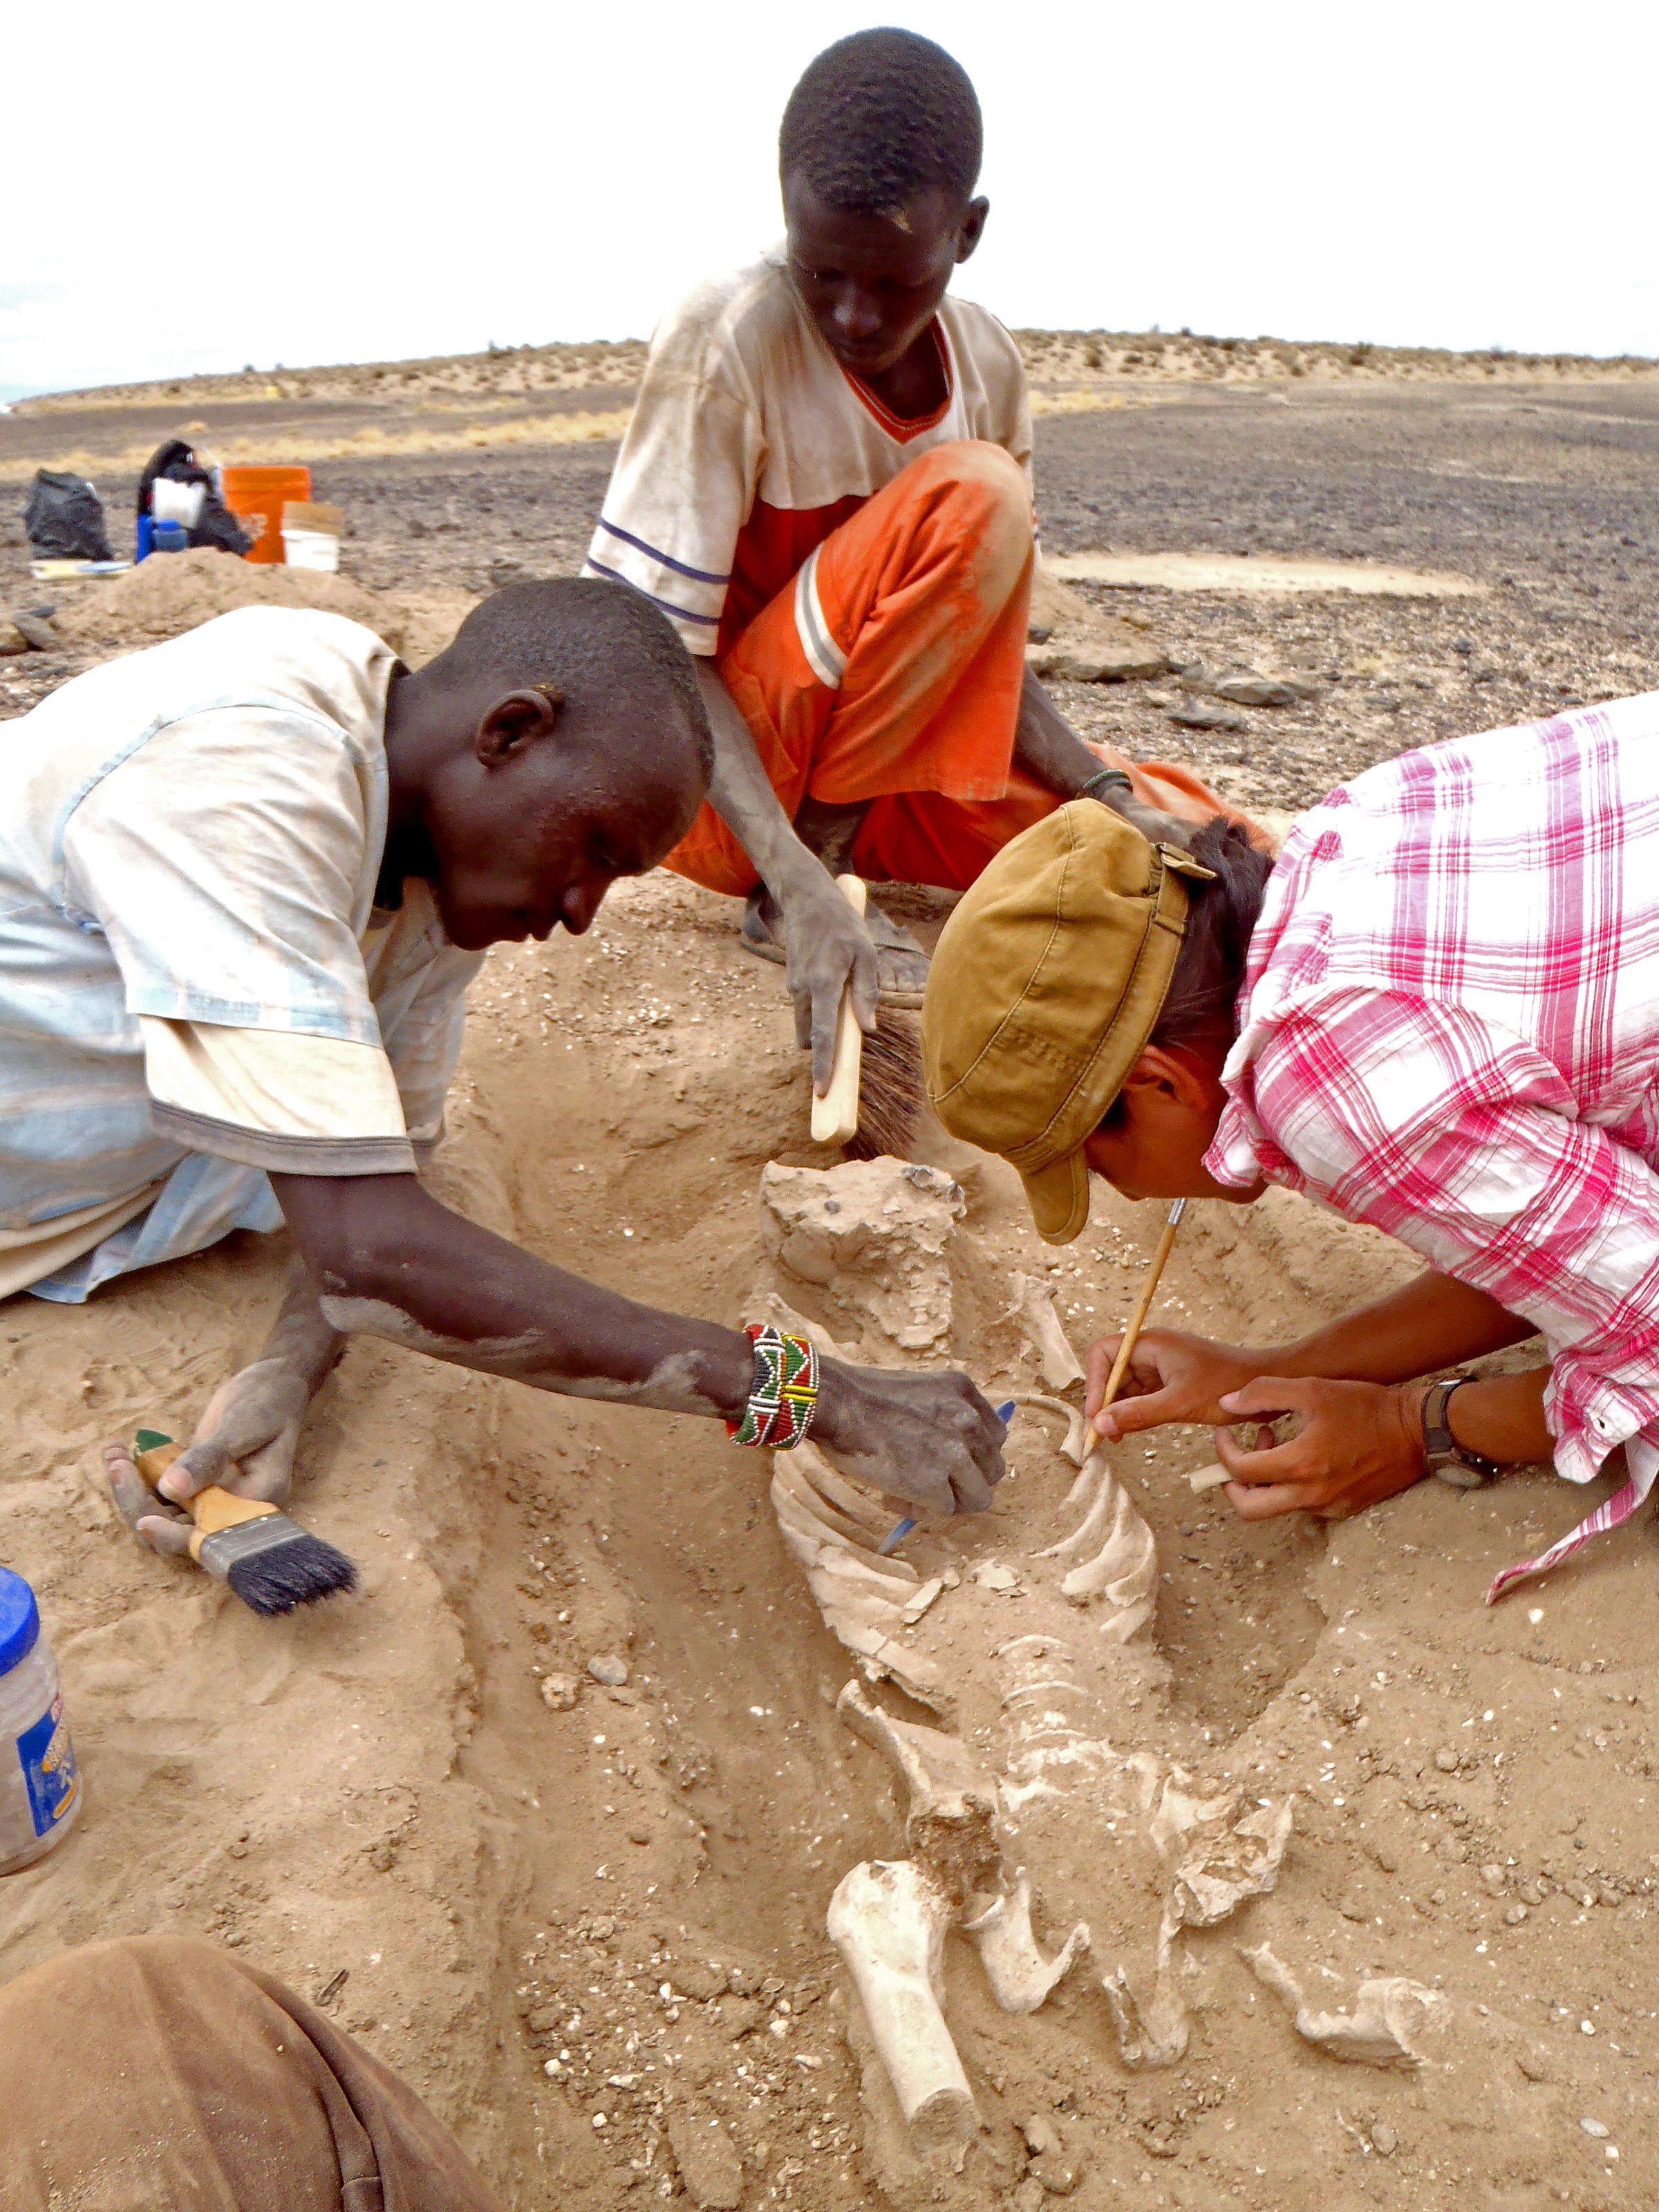 In this August 2012 photo provided by Marta Mirazon Lahr, researcher Frances Rivera, right, Michael Emsugut, left, and Tot Ekulukum excavate a human skeleton at the site of Nataruk, West Turkana, Kenya. This skeleton was that of a woman, found lying on her back, with lesions on her neck vertebrae consistent with a projectile wound. She also had multiple fractures on one of her hands. Writing in a paper released on Jan. 20, 2016, by the Nature Journal, scientists said it’s one of the clearest cases of violence between groups among prehistoric hunter-gatherers.